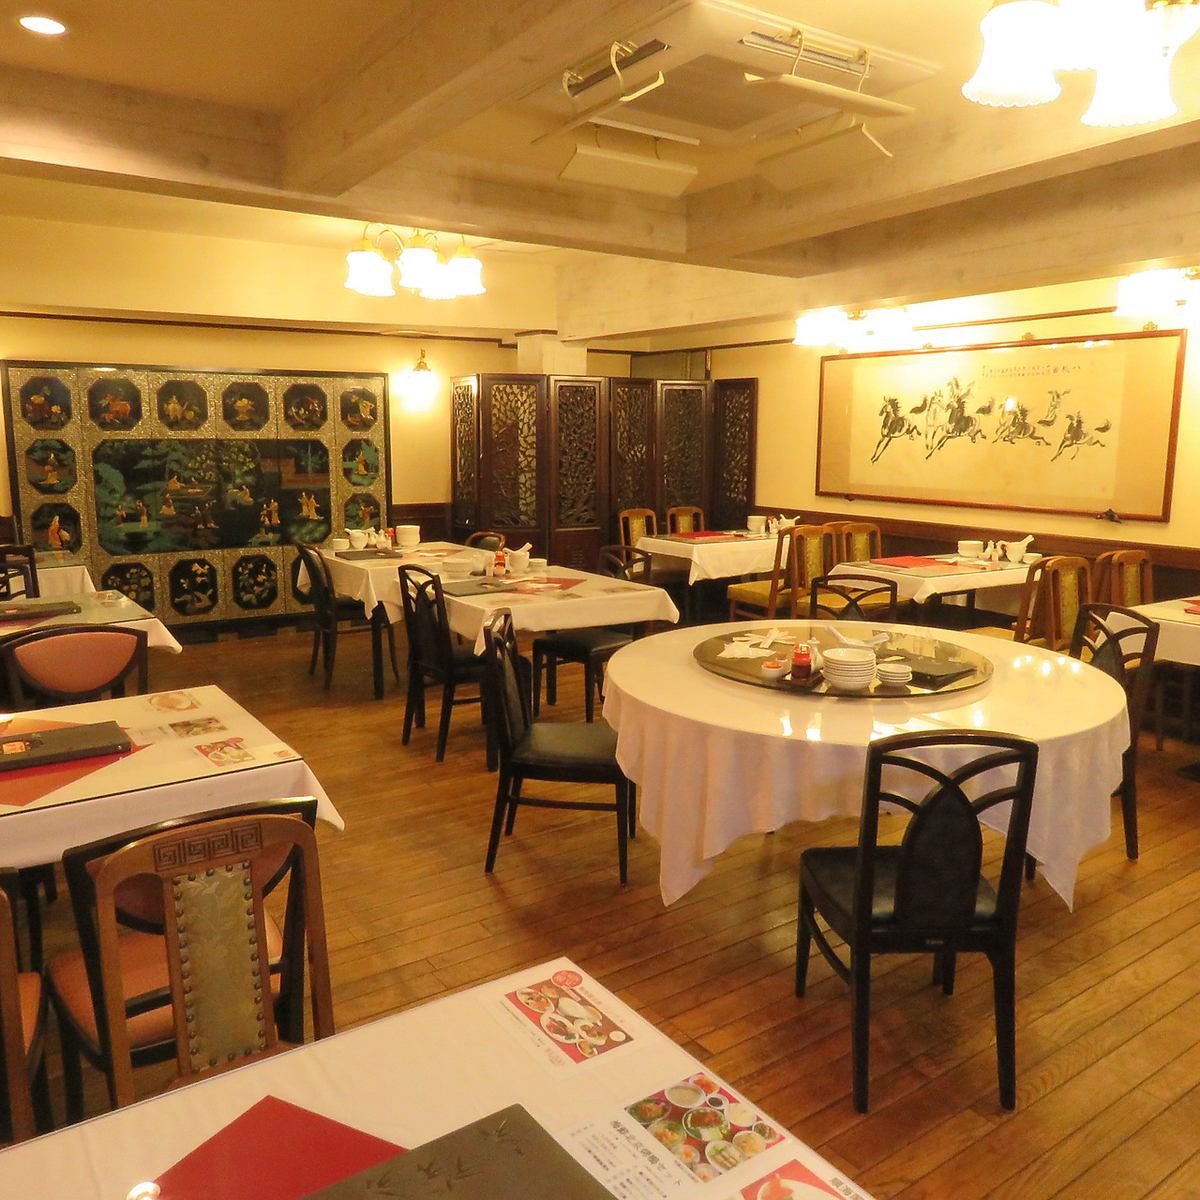 We also welcome parties of 10 or more people! Enjoy your party at our restaurant with over 200 seats!